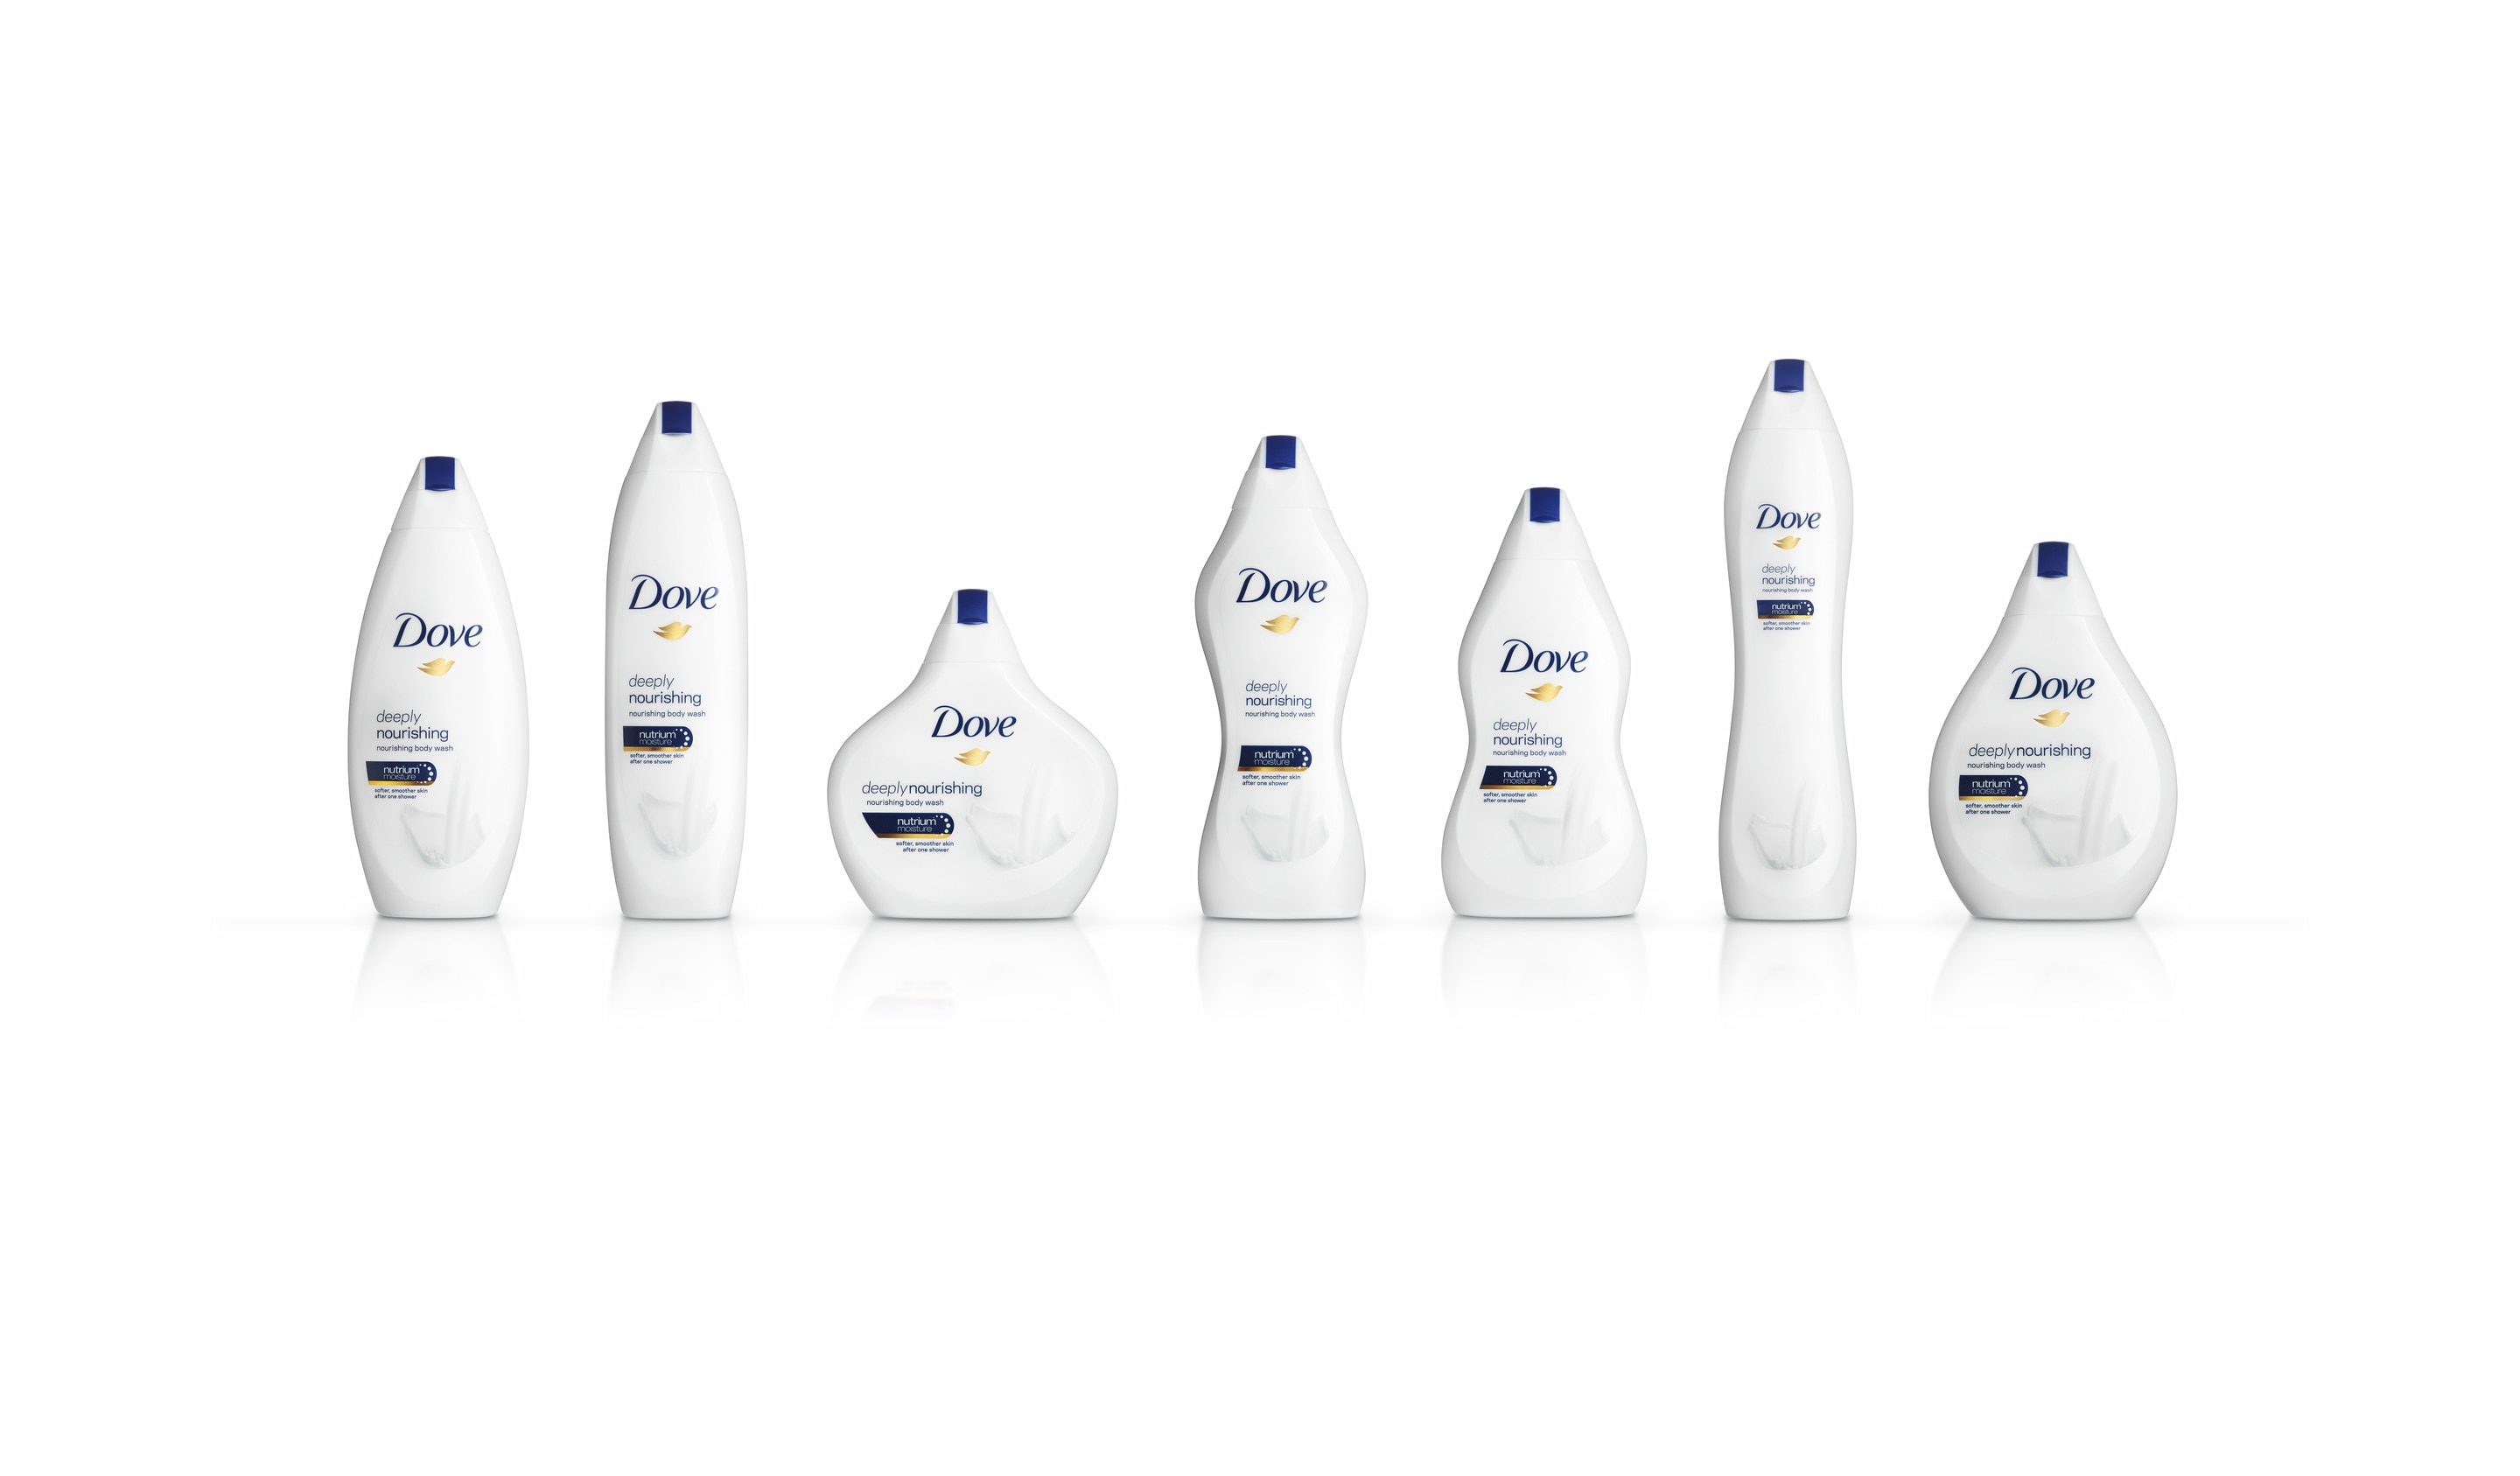 Limited Edition Dove Body Washes